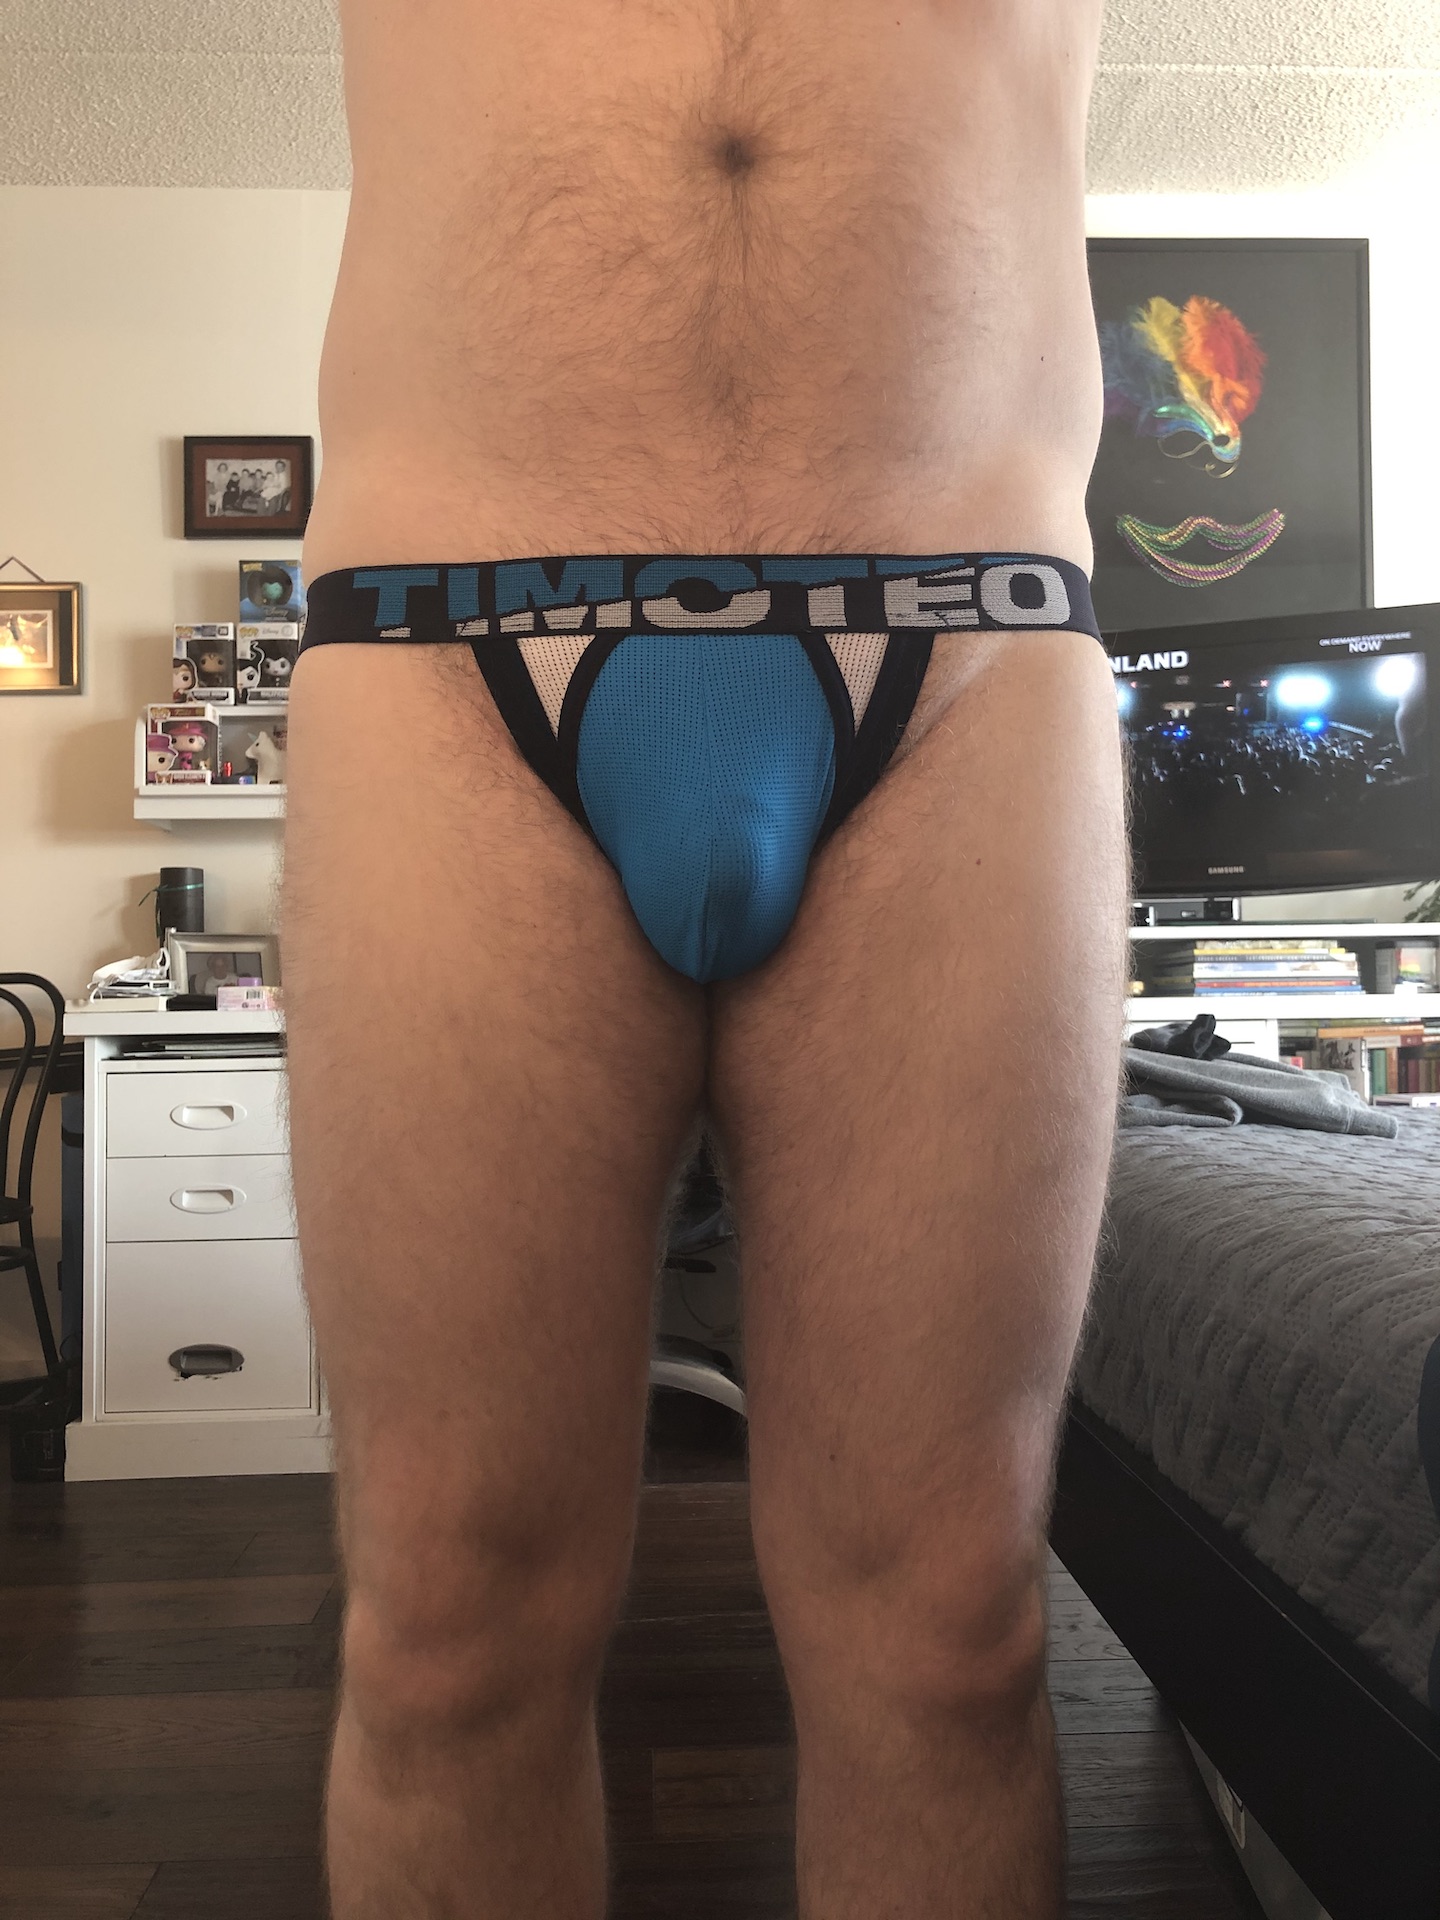 Mesh jock from Timoteo today…had forgotten this one…